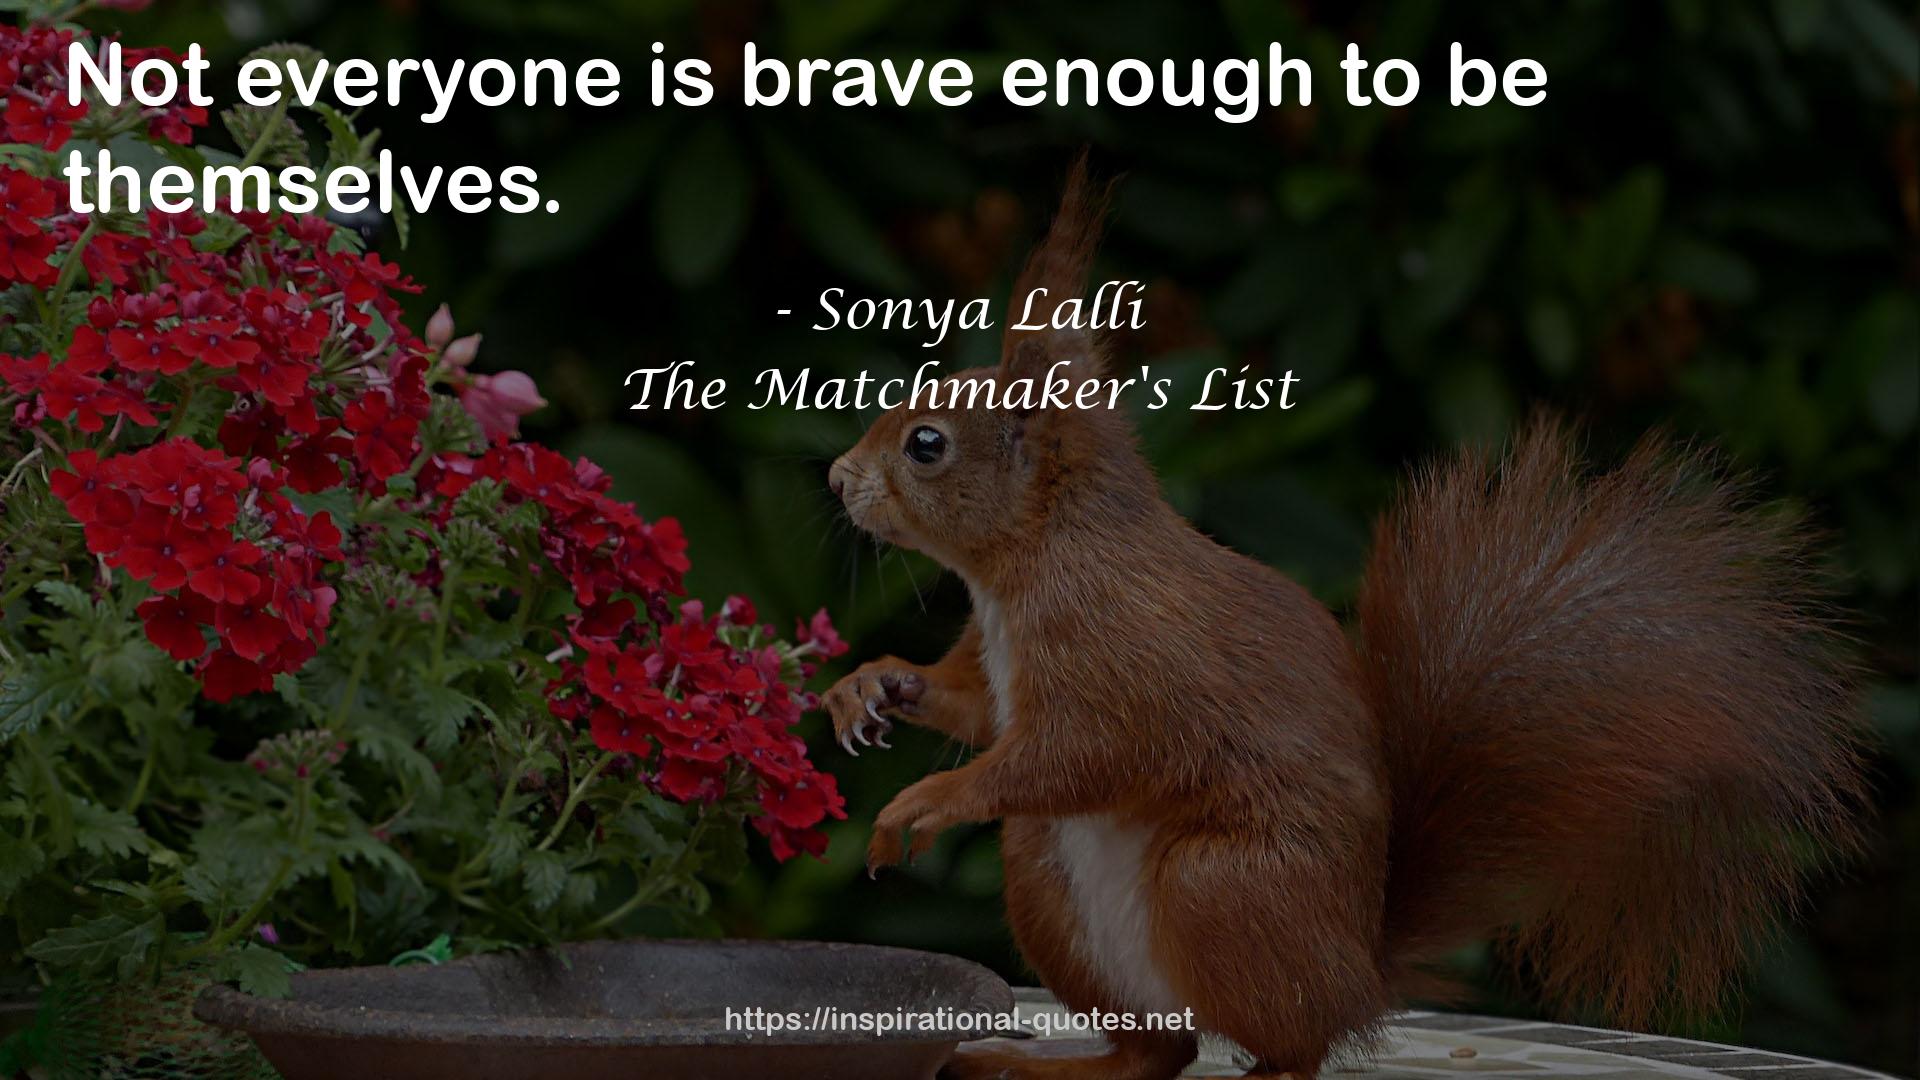 The Matchmaker's List QUOTES